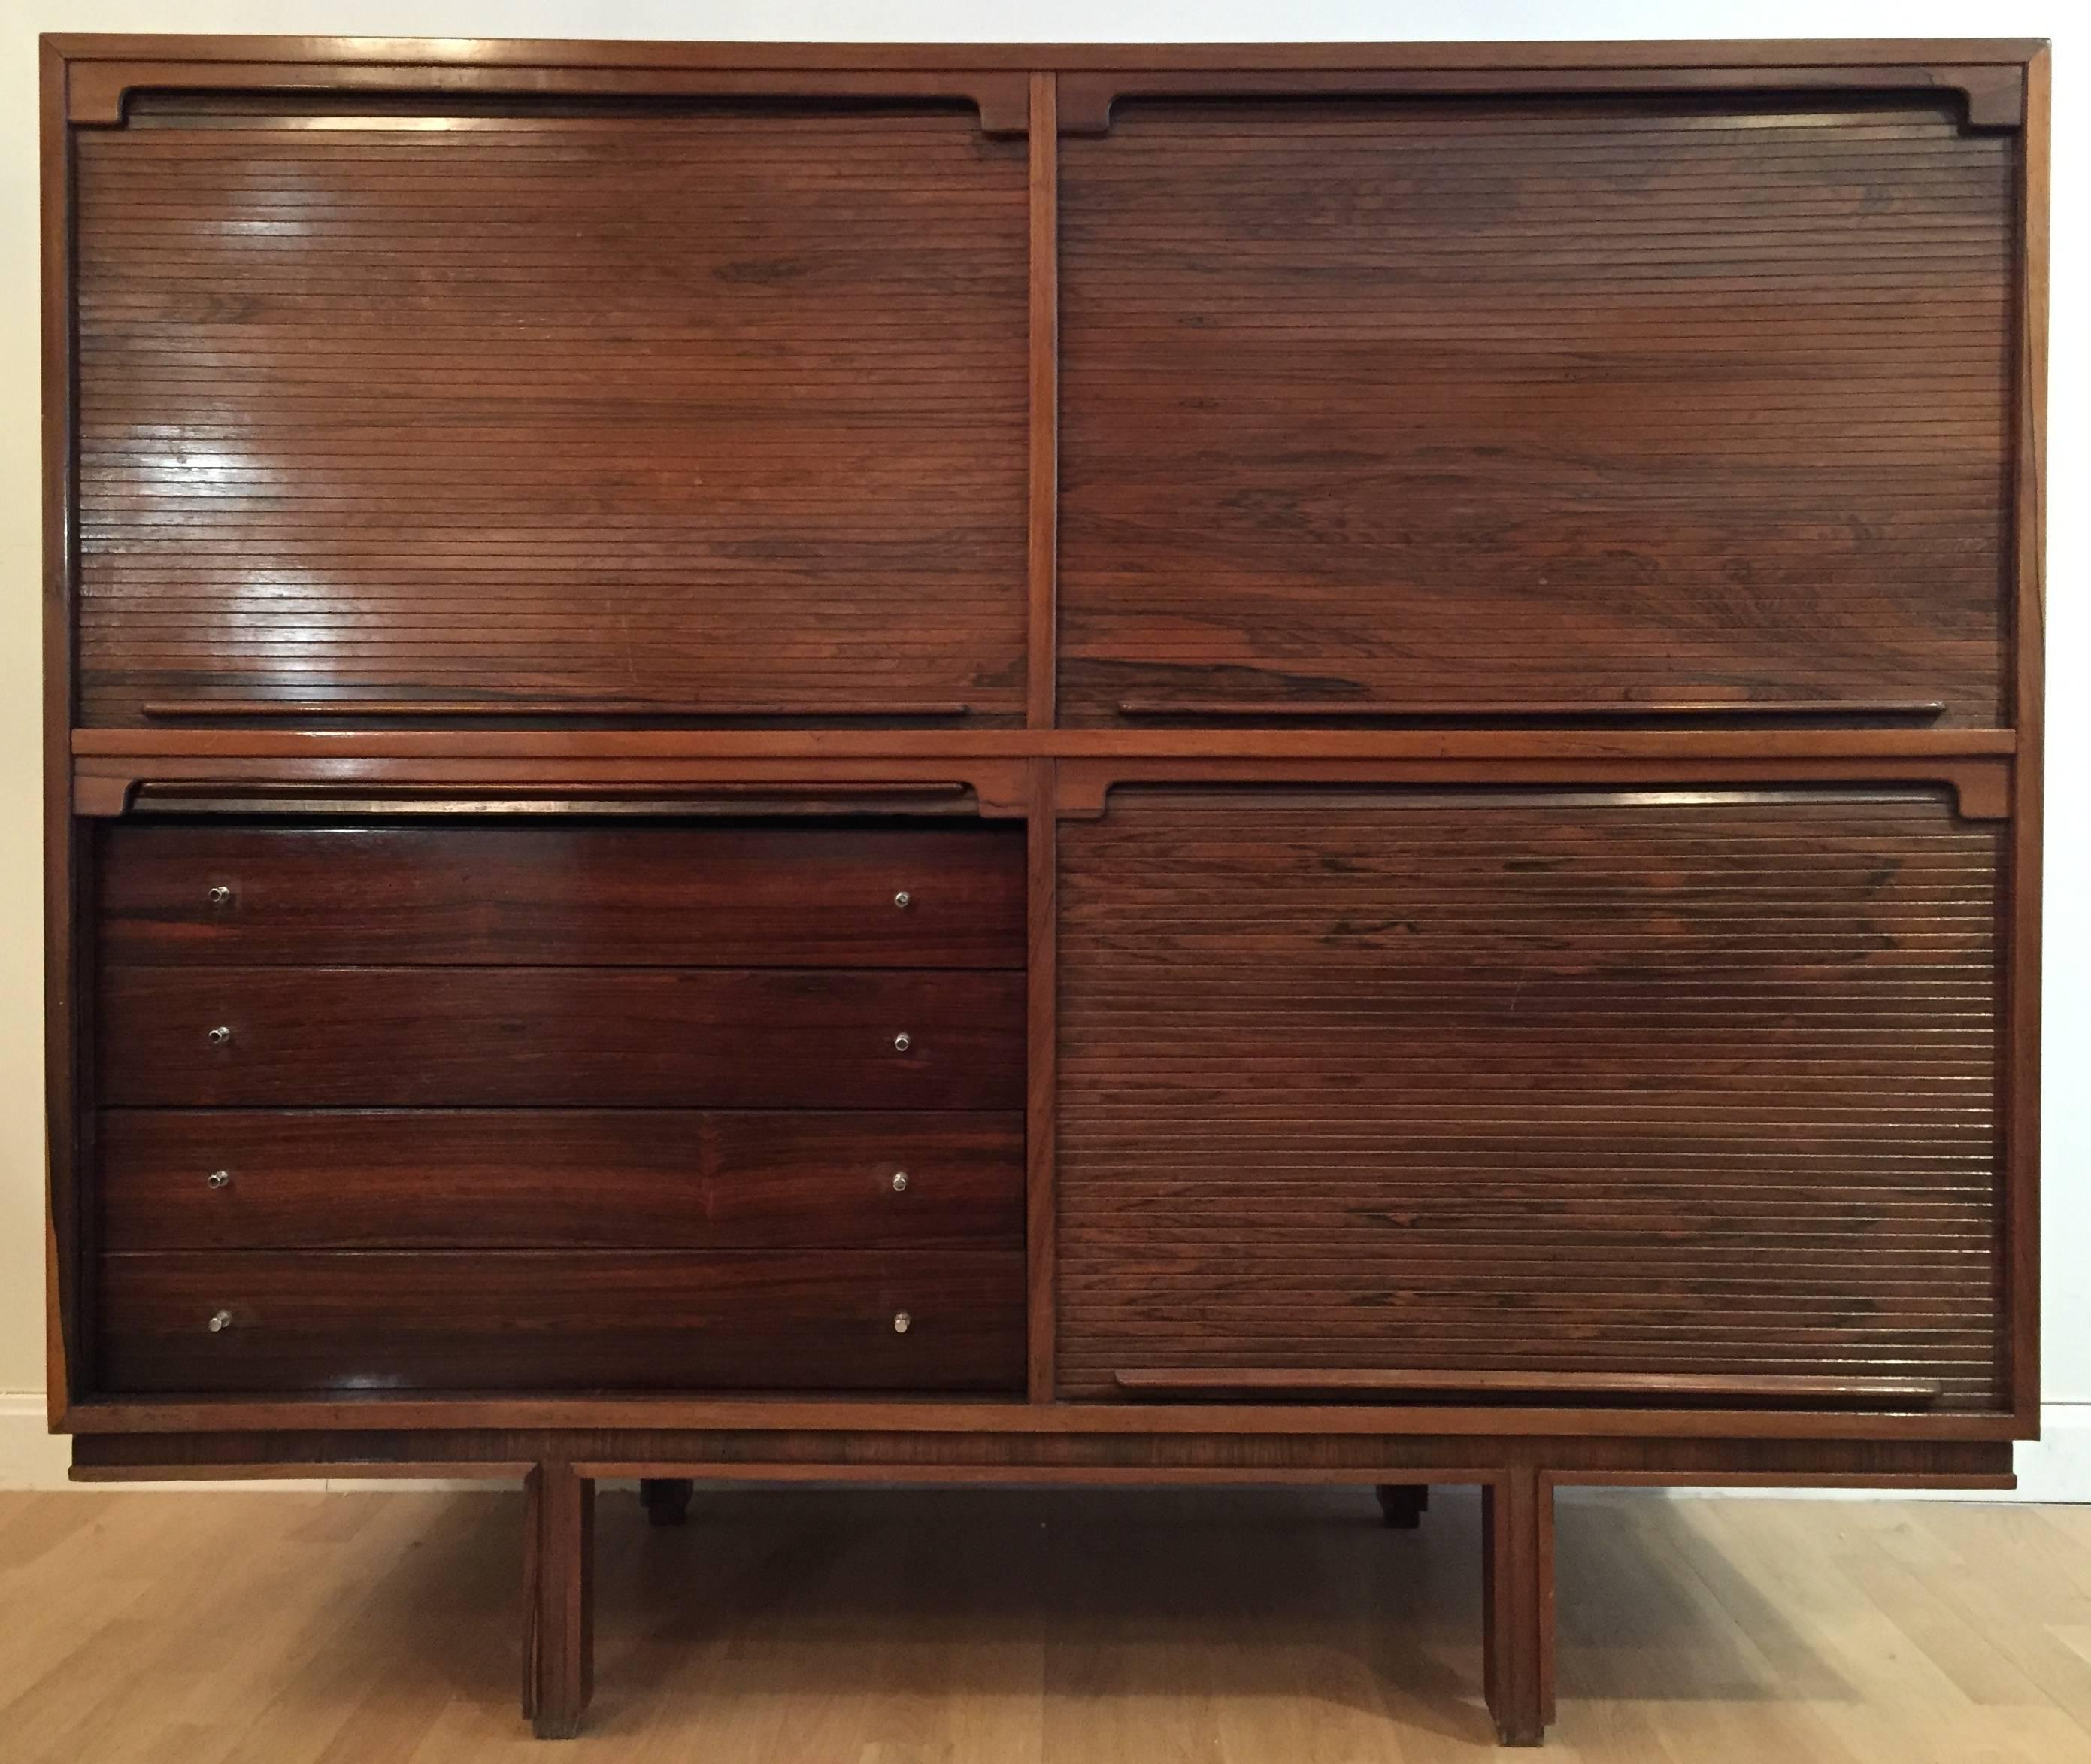 A rosewood Mid-Century cabinet designed by Gianfranco Frattini and edited by Bernini in 1957. Four sliding tambour doors, inside with shelves of adjustable height and four drawers. Excellent original condition.